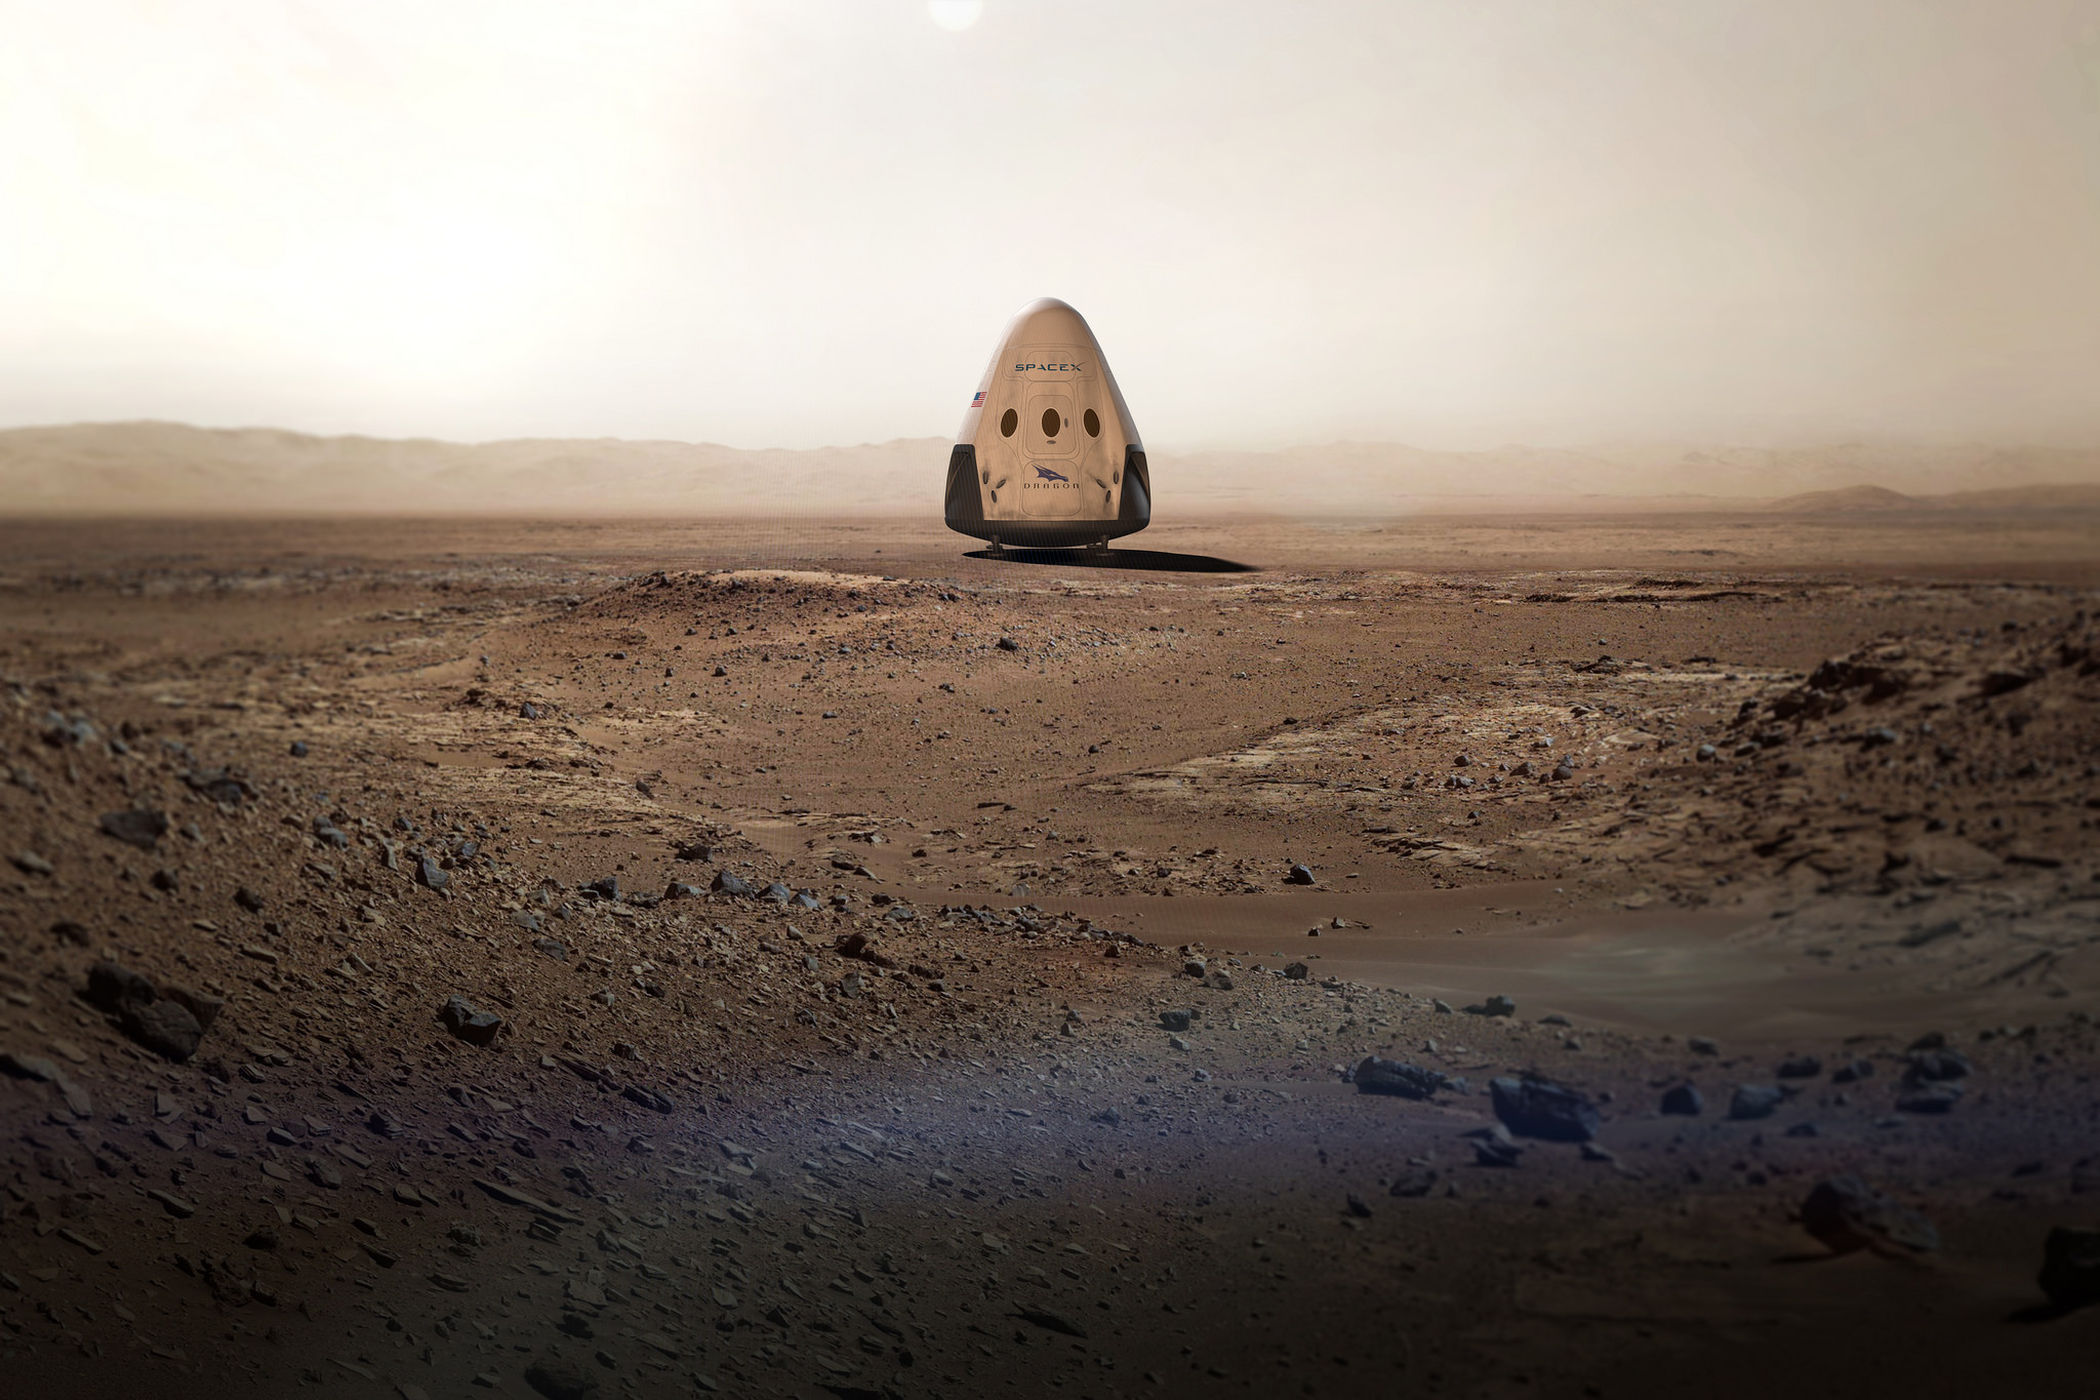 spacex-red-dragon-on-mars